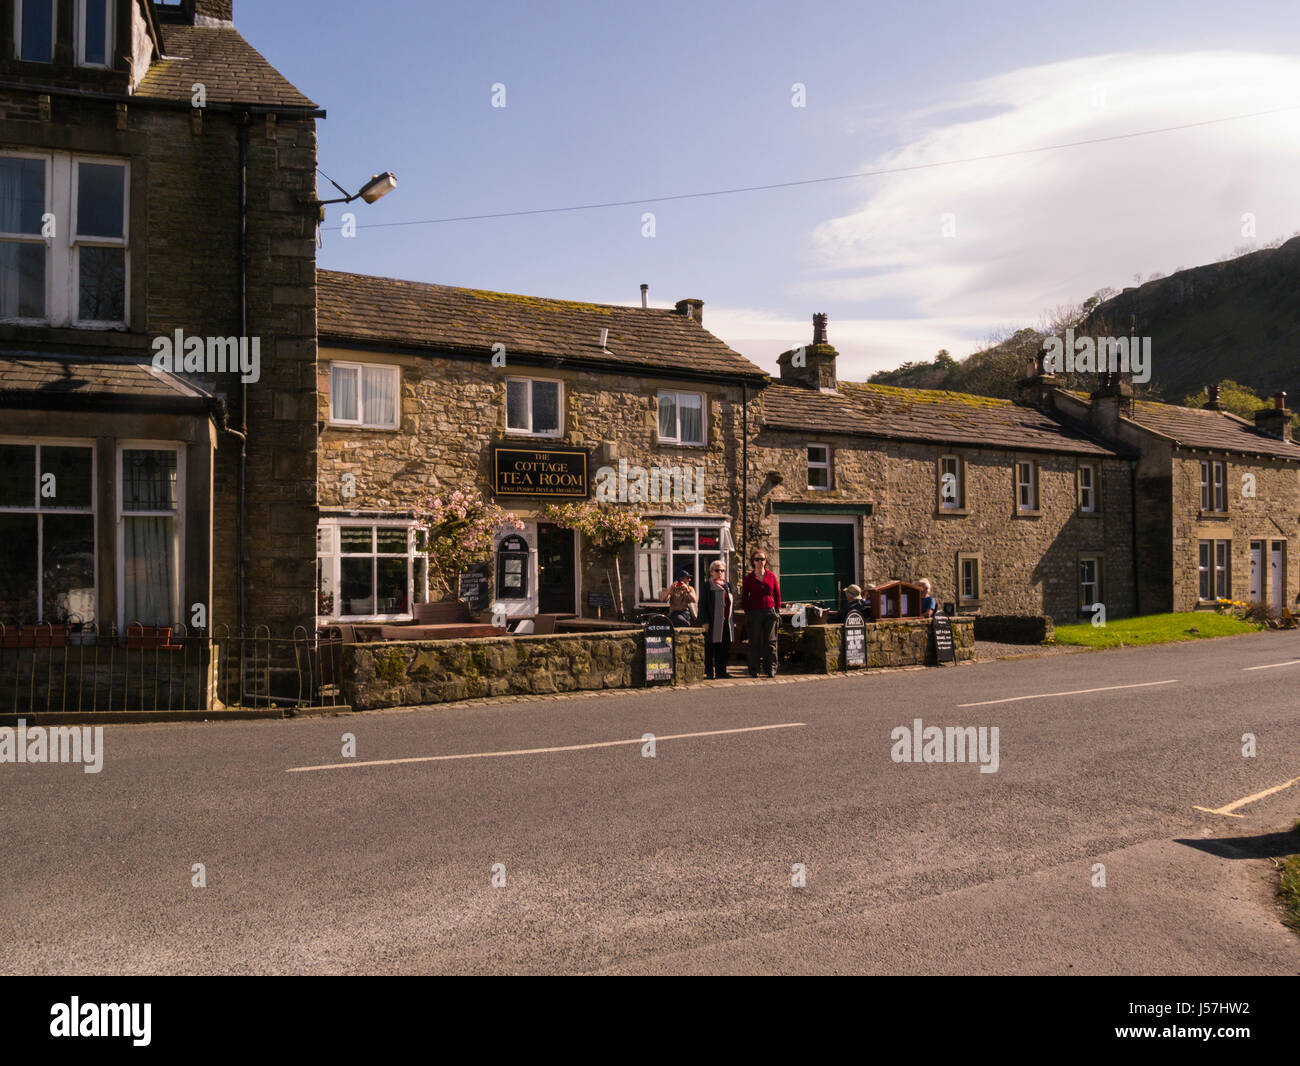 Il Cottage di Tea Room Bed and Breakfast Kettlewell villaggio Wharfedale superiore Yorkshire Dales National Park North Yorkshire Gran Bretagna GB UK Foto Stock